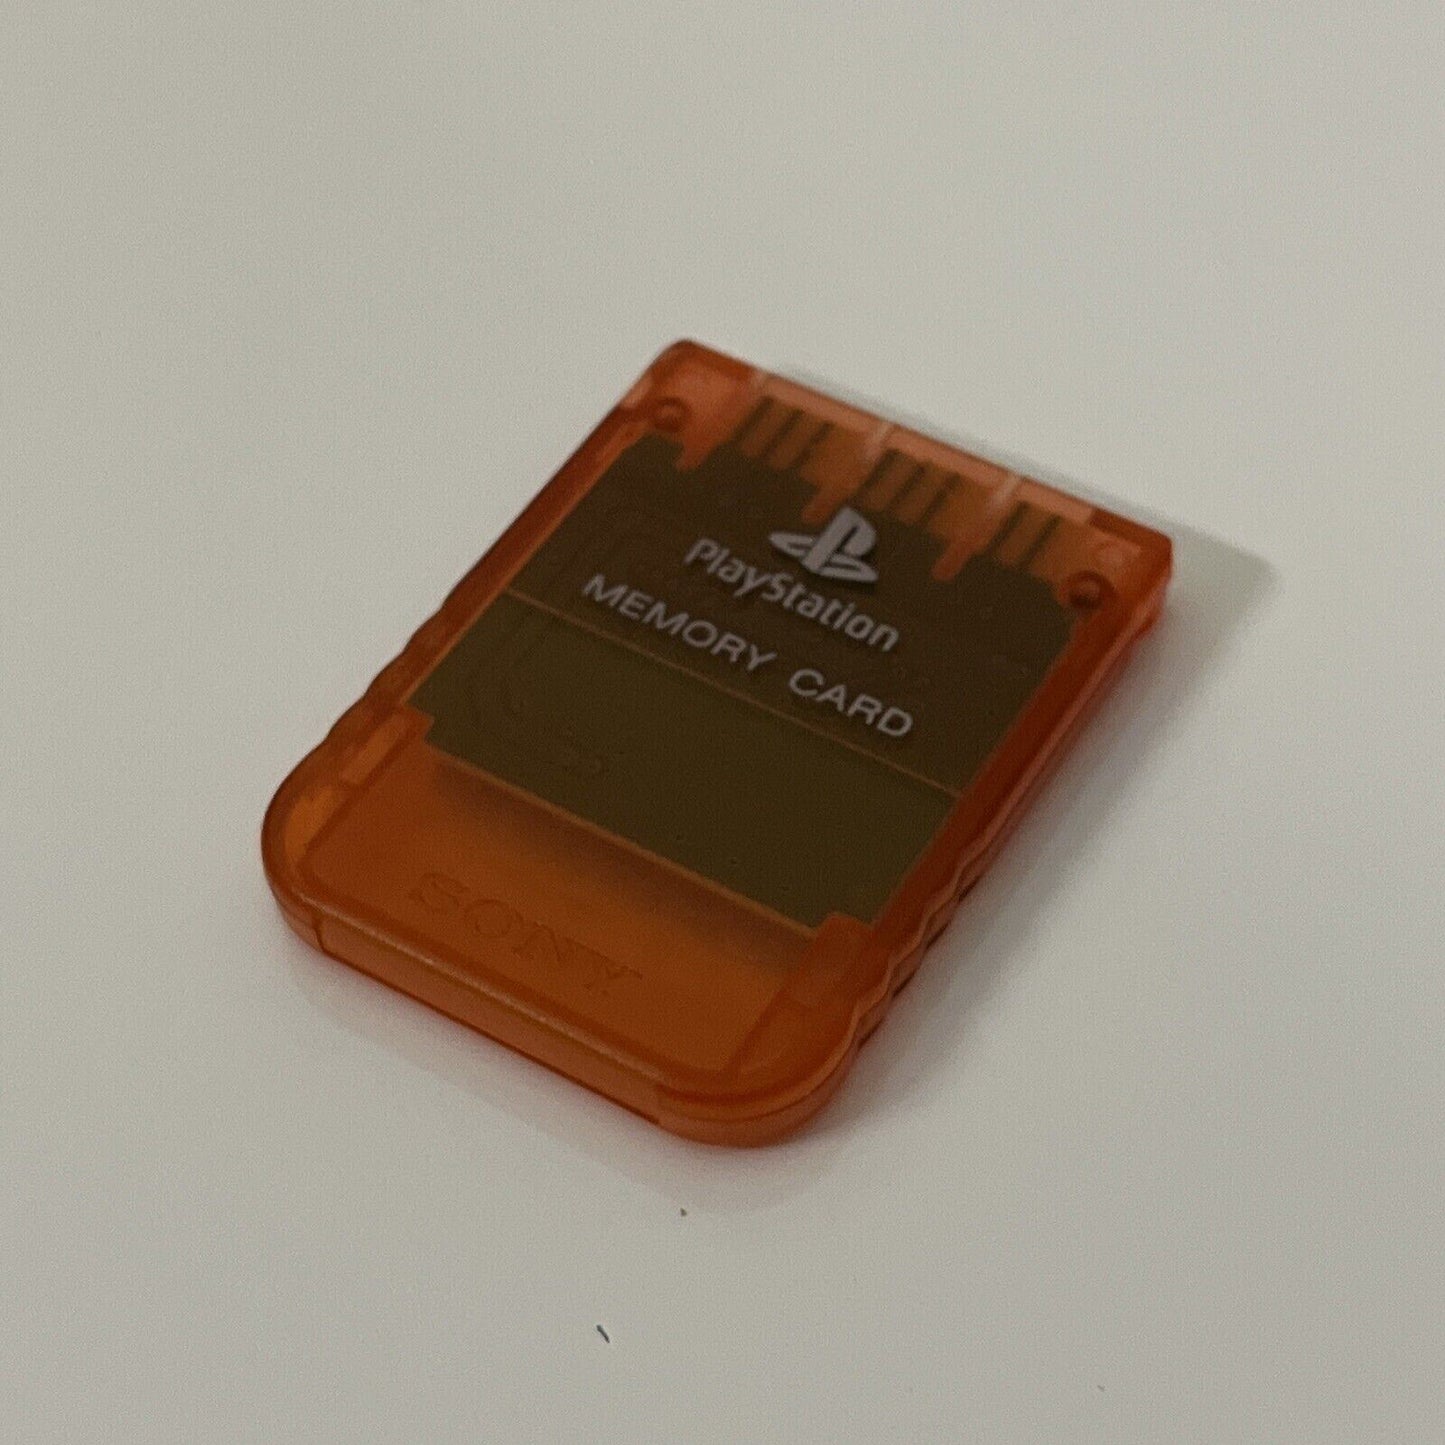 Genuine Sony Playstation PS1 Memory Card 1MB SCPH-1020 Orange Transparent